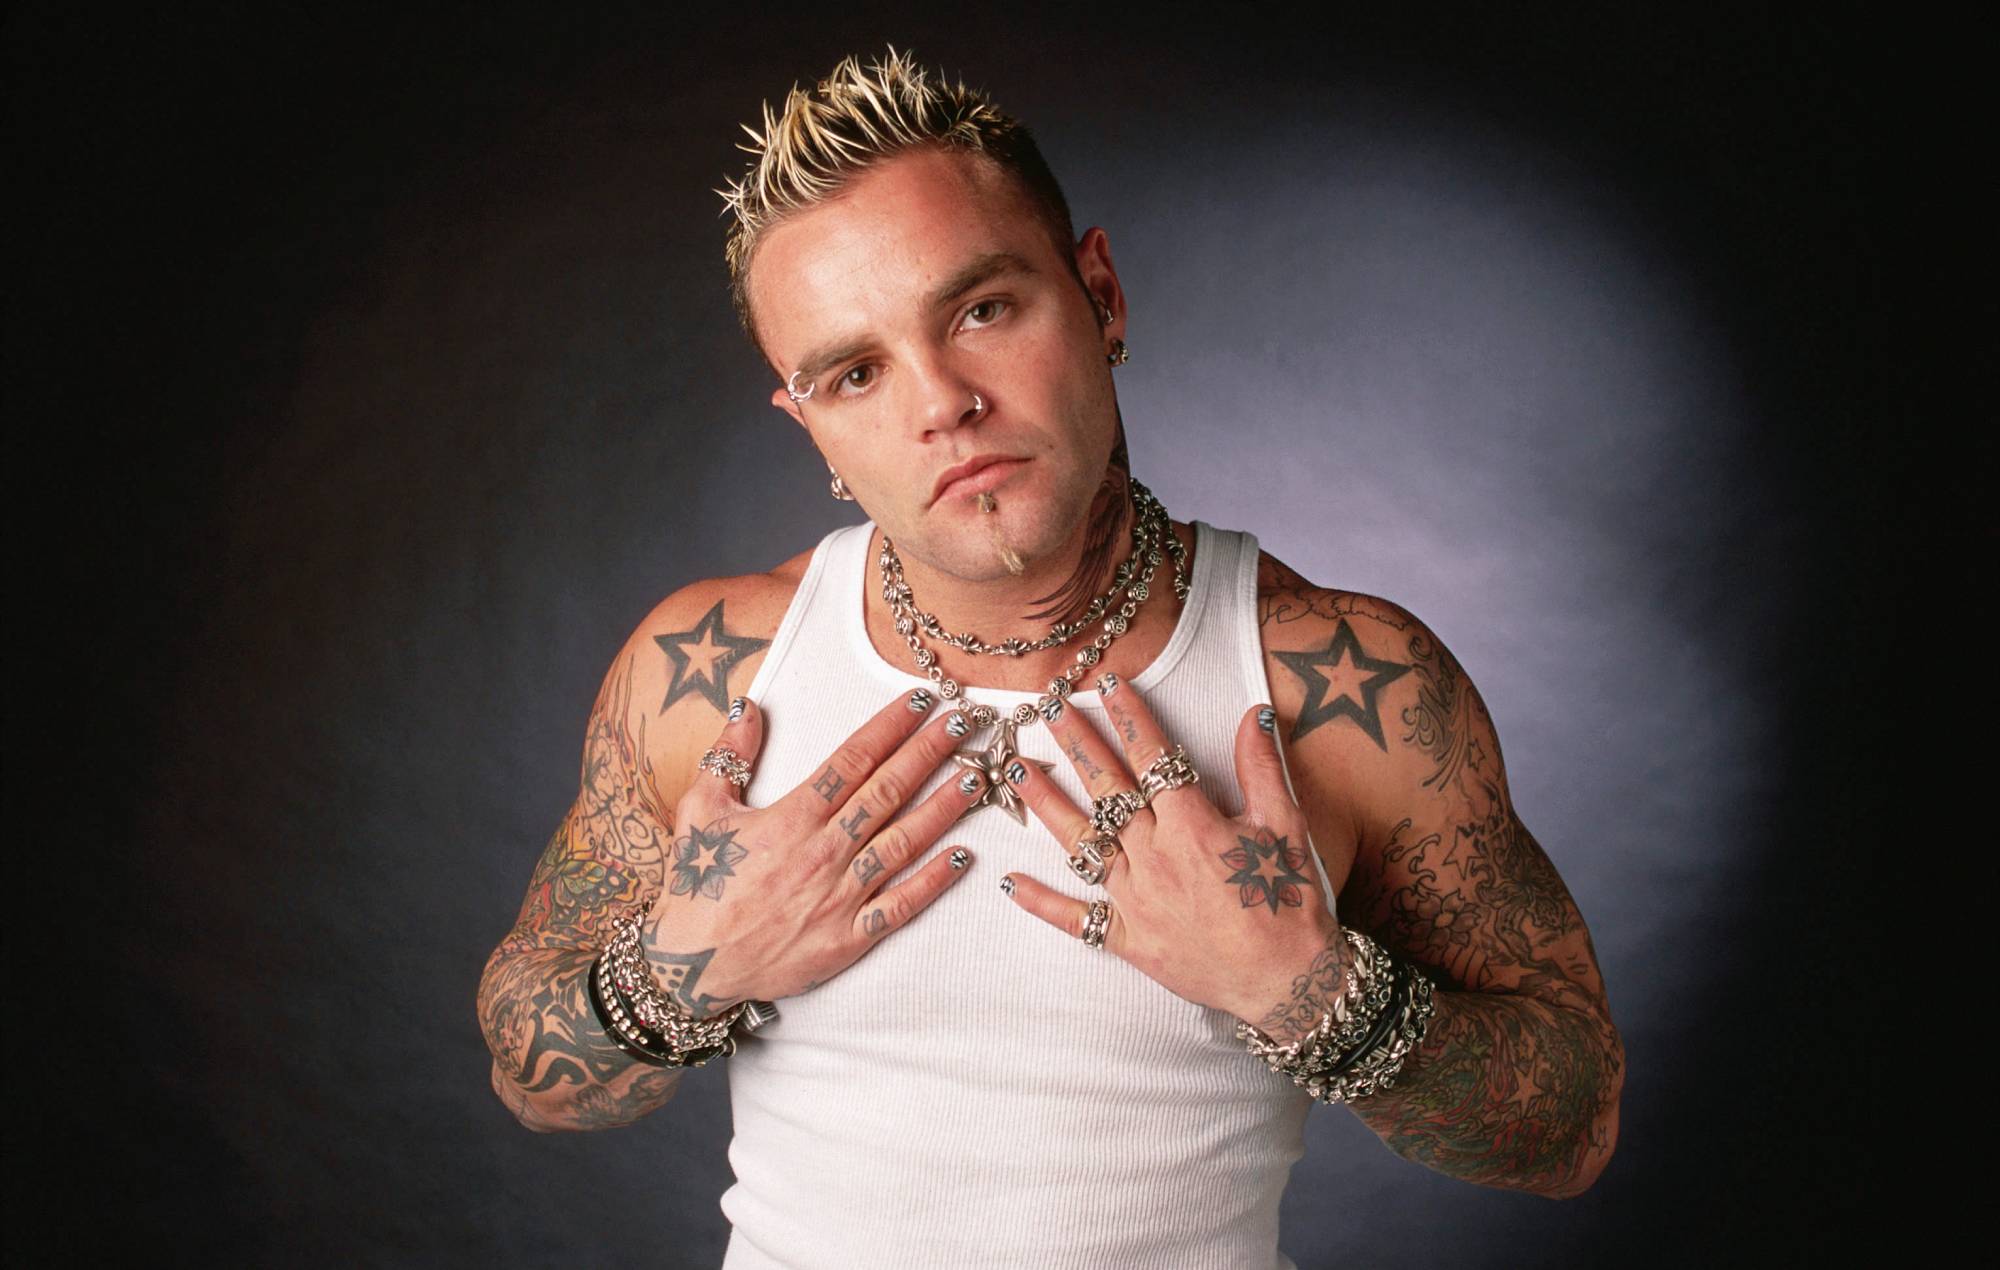 Crazy Town frontman Shifty Shellshock’s cause of death revealed